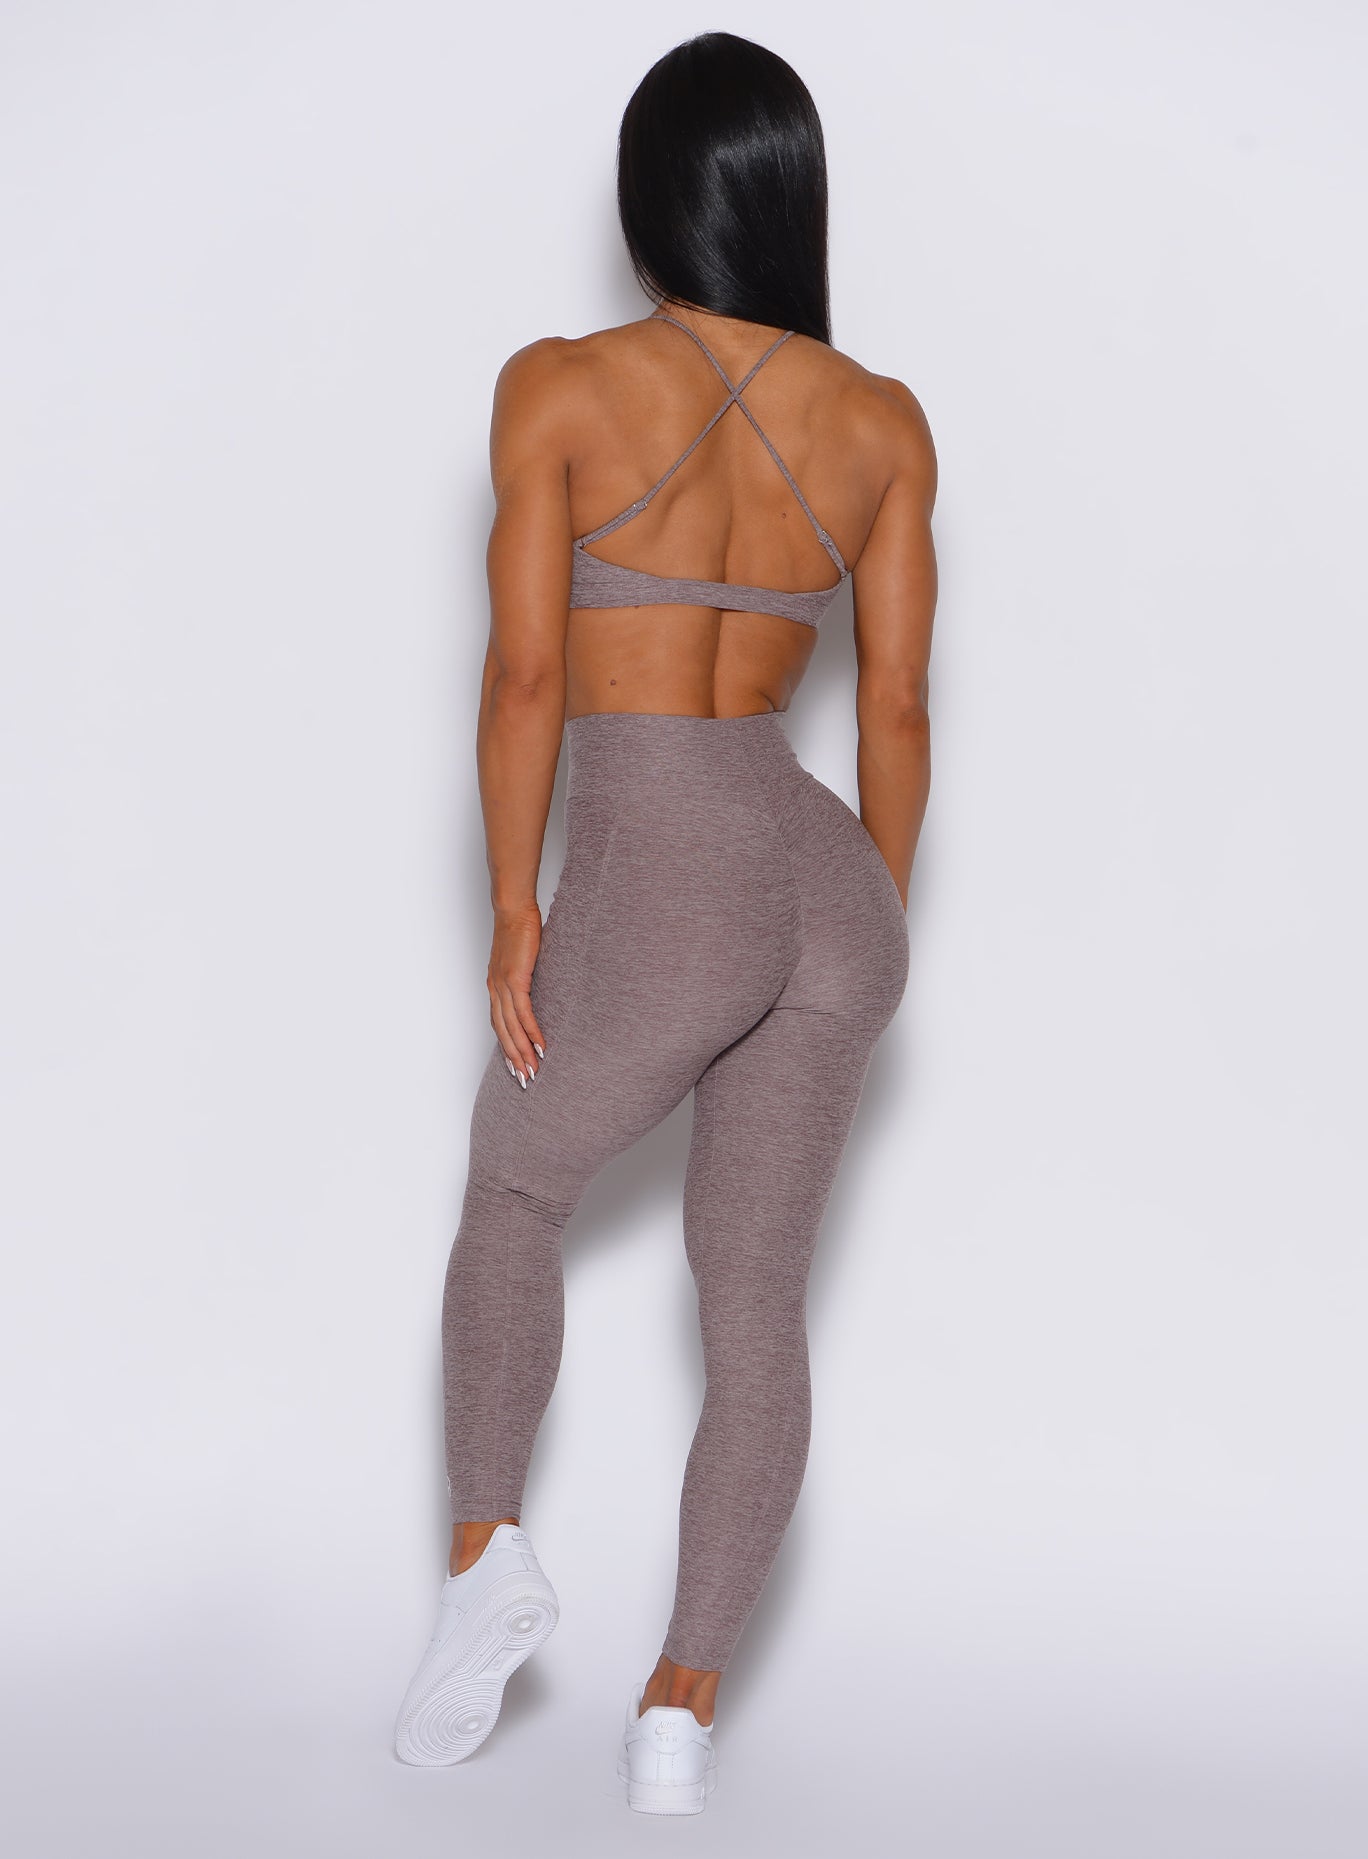 Back profile view of a model wearing our curves leggings in london fog color along with the matching bra